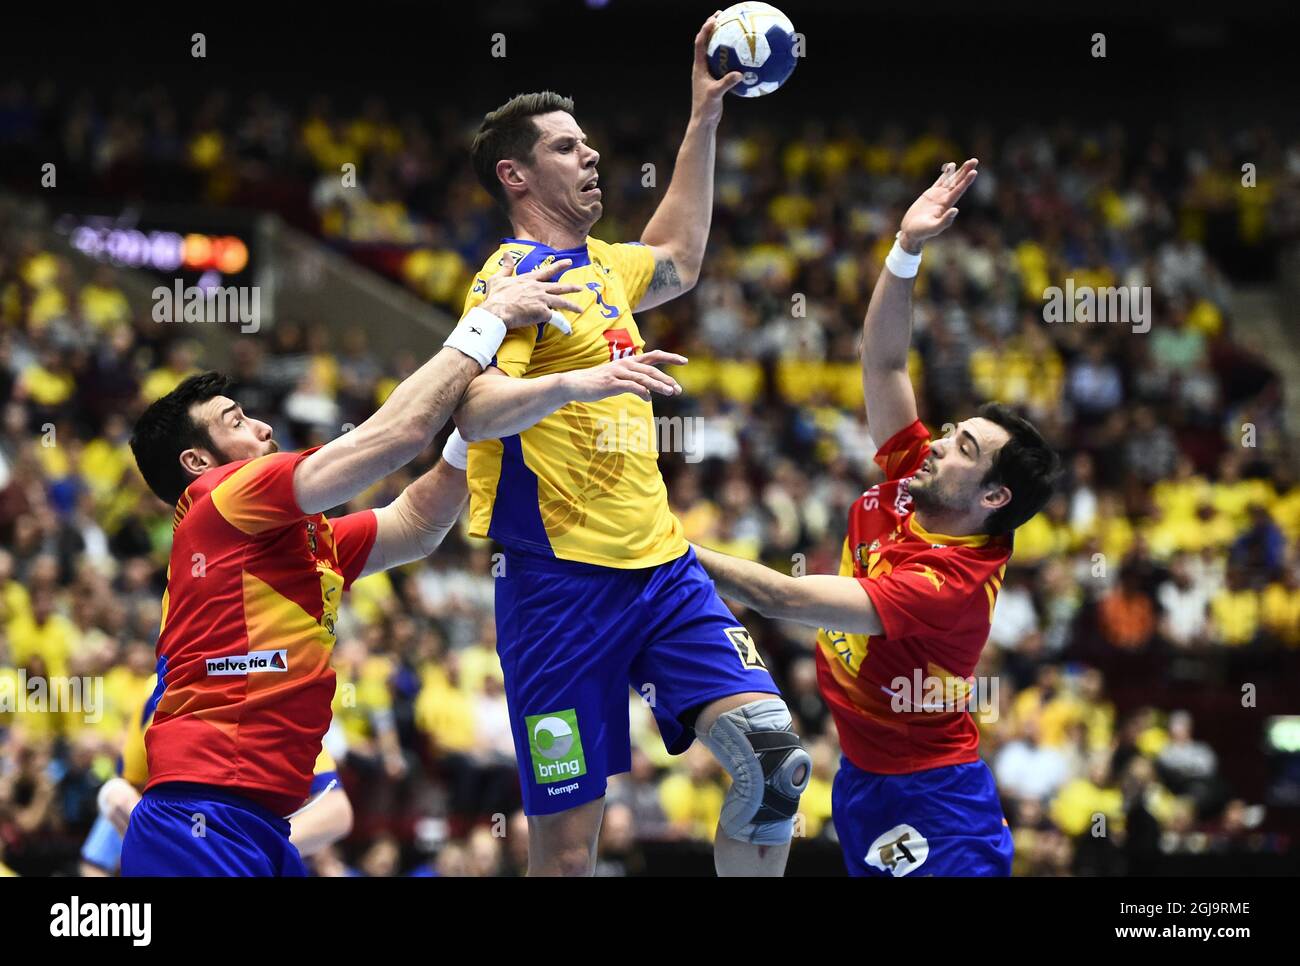 Sweden's Kim Andersson between Spain's Gedeon Guardiola and Cristian Ugalde during the men's handball Olympic Qualification Tournament group 2 between Sweden and Spain at Malmo Arena in Malmo, Sweden, April 10, 2016. Photo Emil Langvad / TT Stock Photo